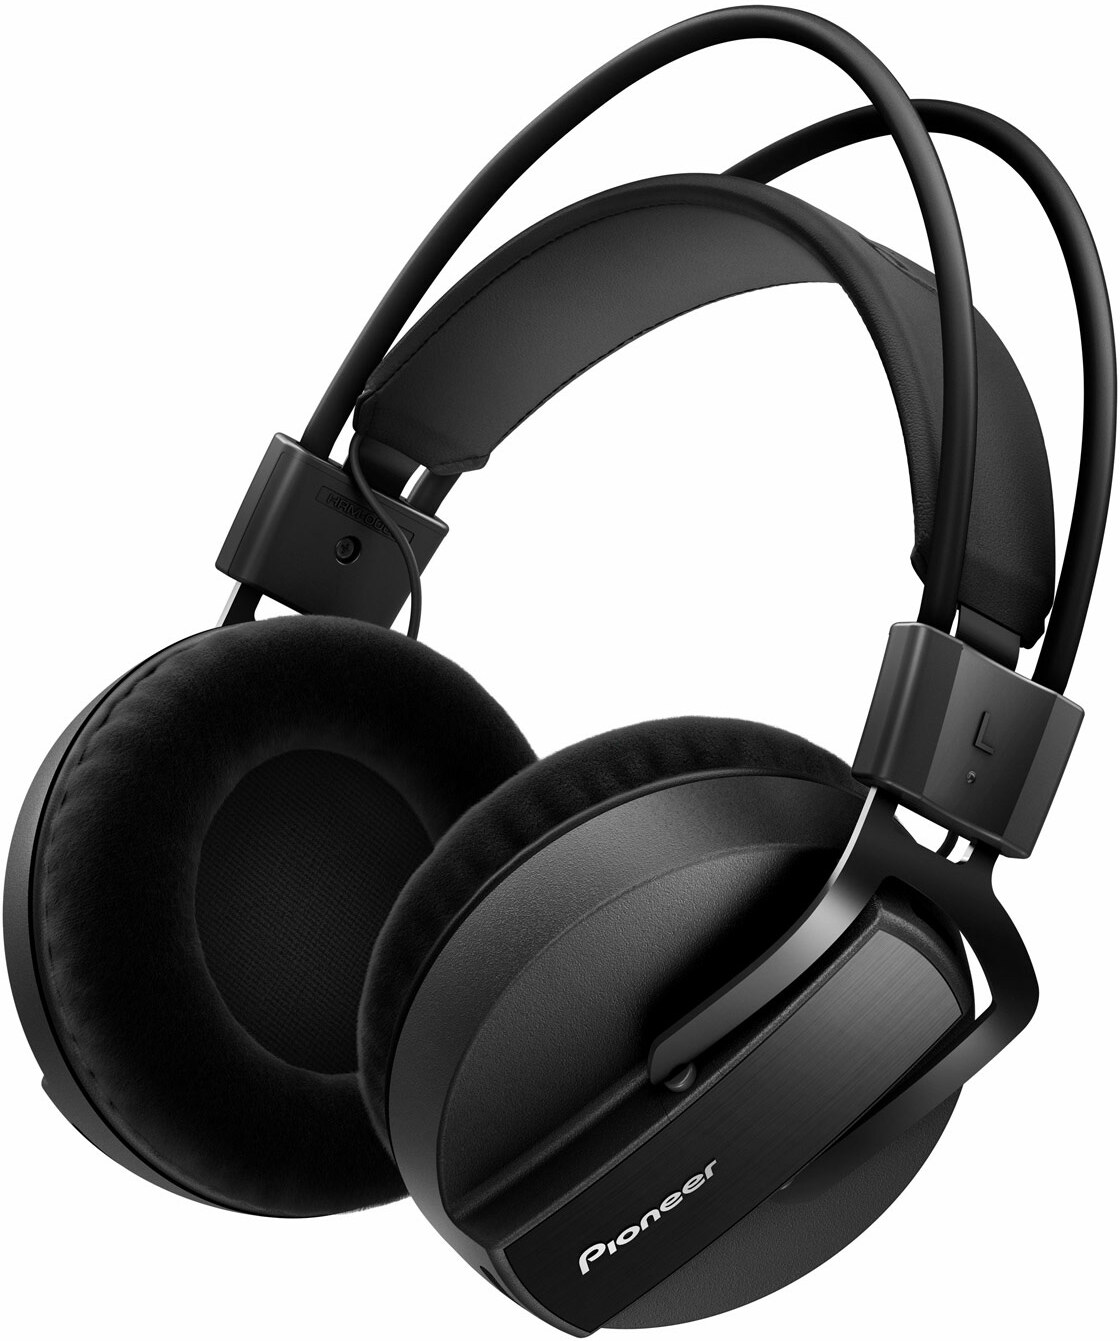 Pioneer Dj Hrm-7 - Closed headset - Main picture